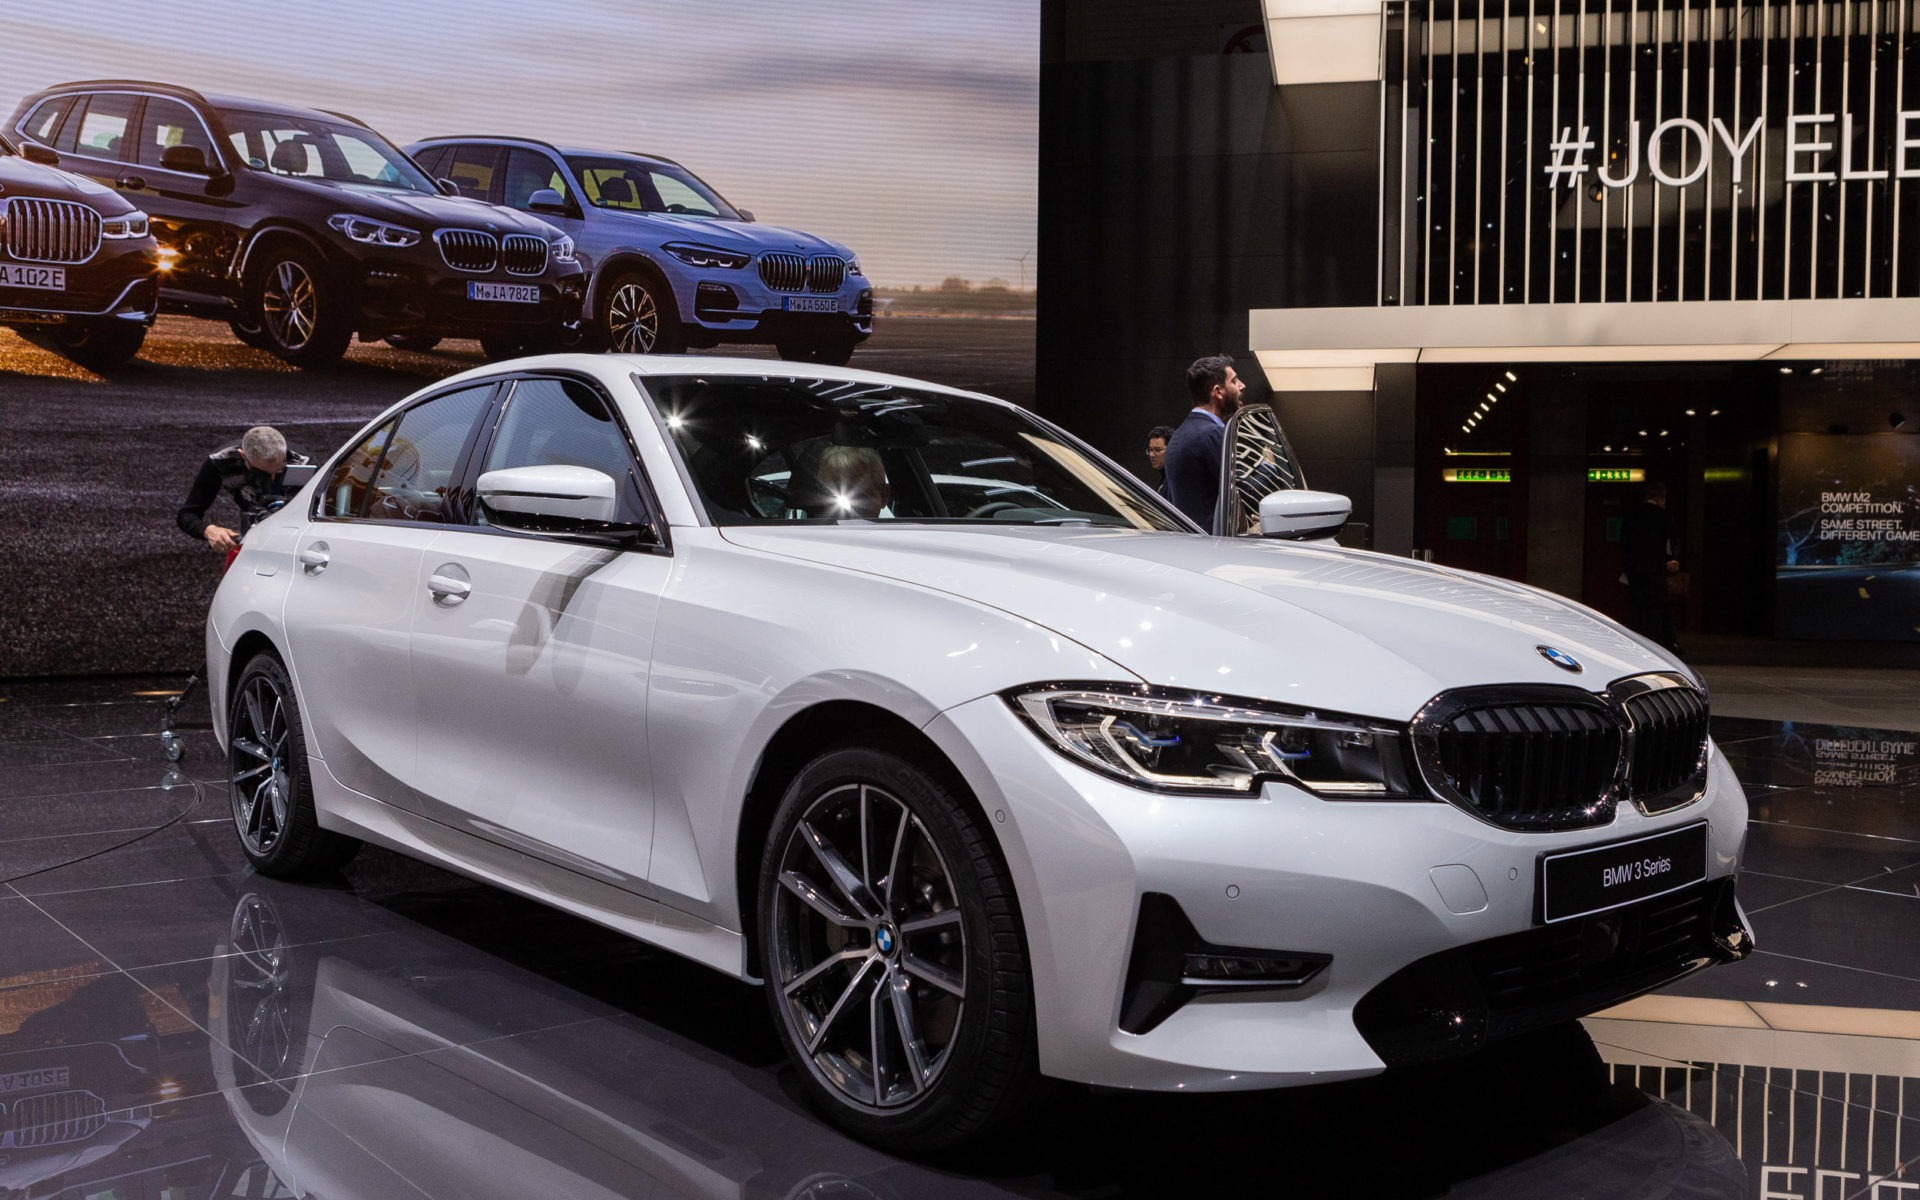 New BMW X3, 3 Series Plug-in Hybrid Models Introduced in Geneva - The